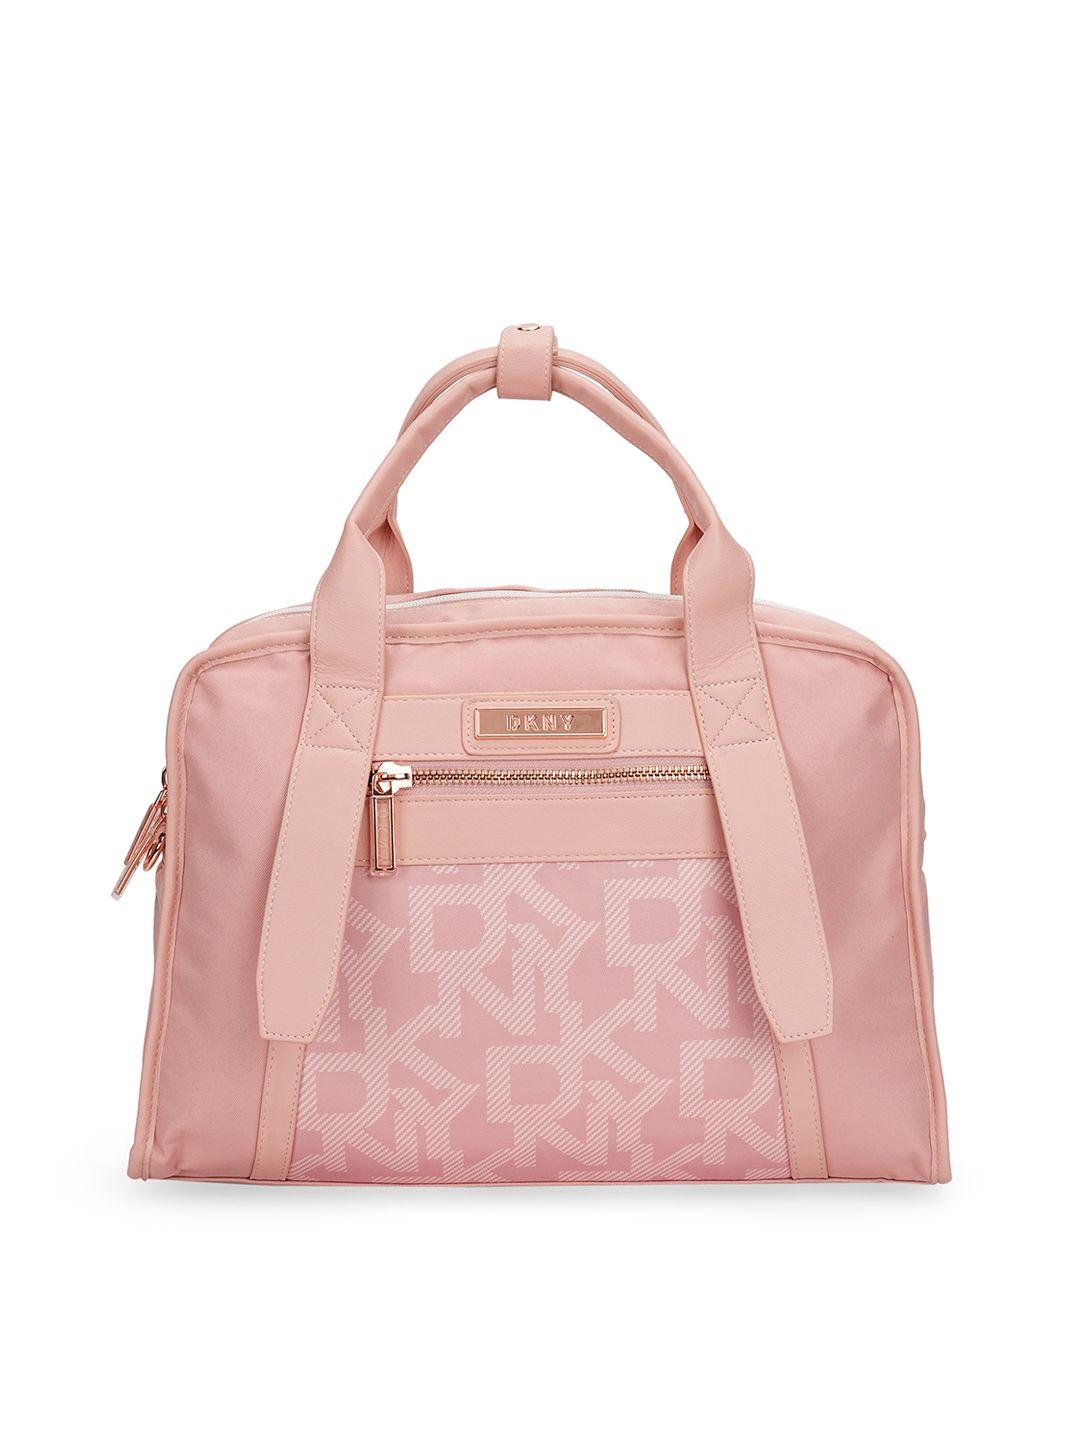 dkny after hours printed structured handheld bag